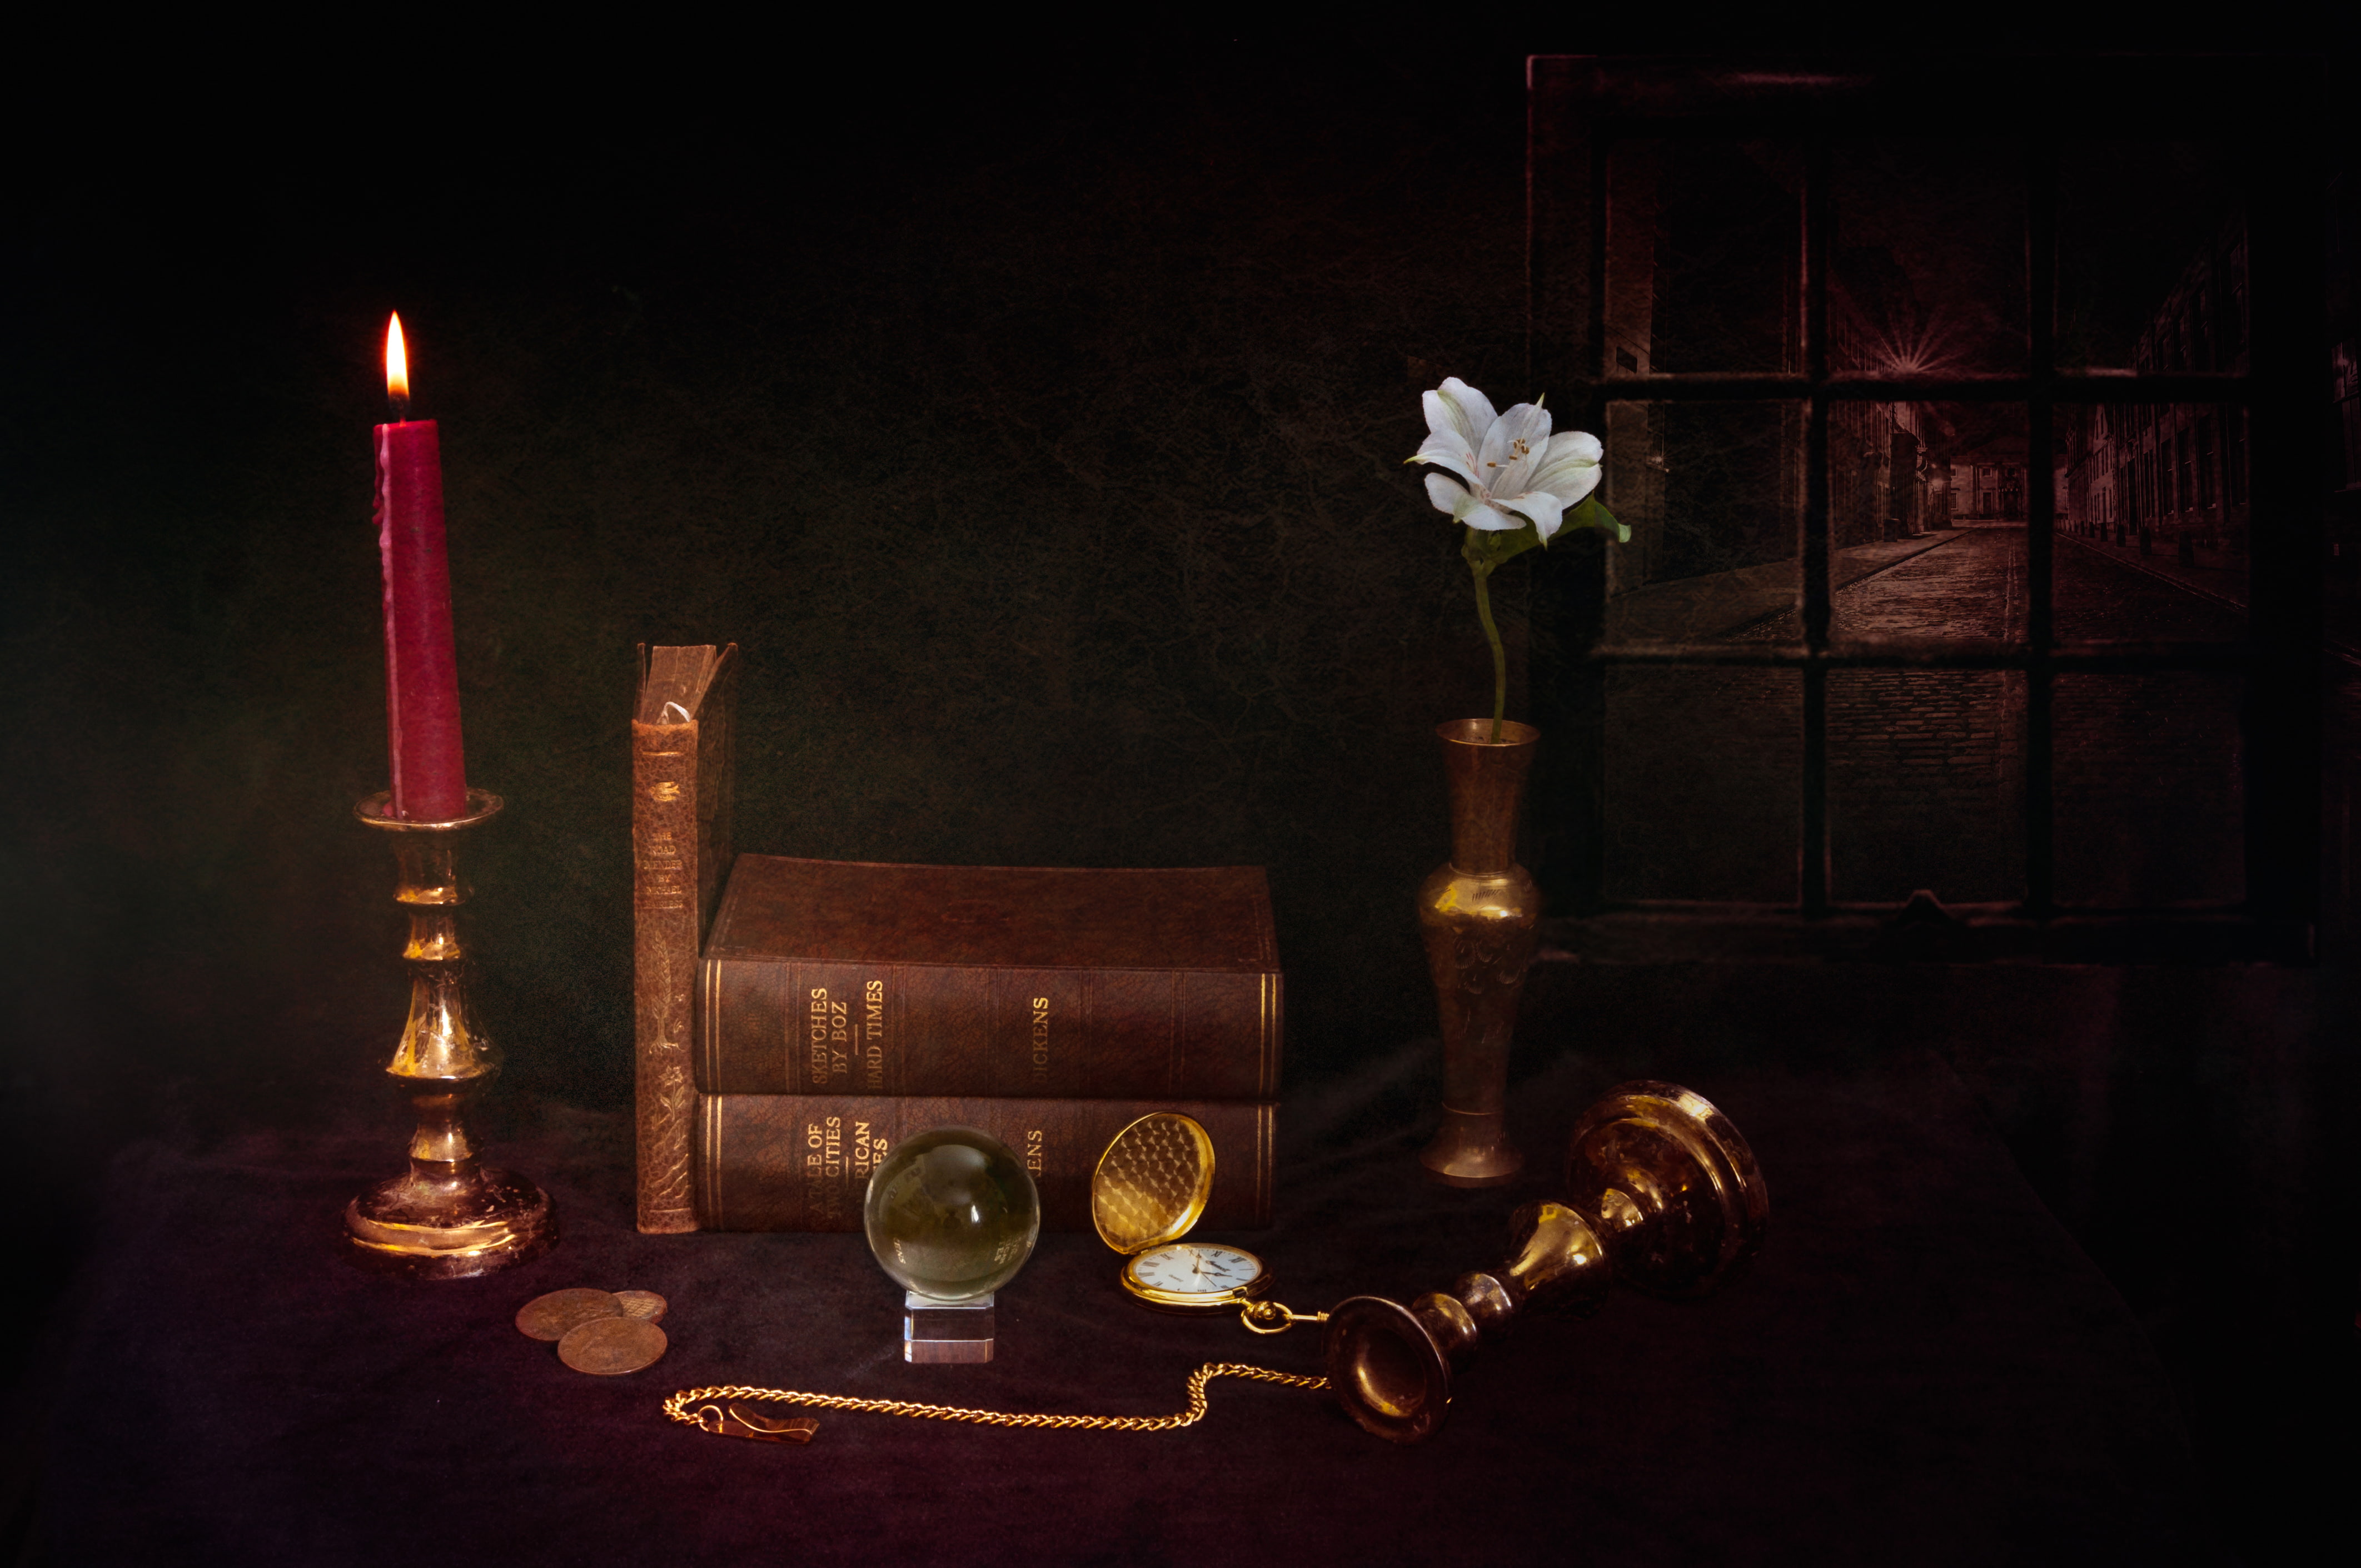 flower, watch, books, candle, coins, still life